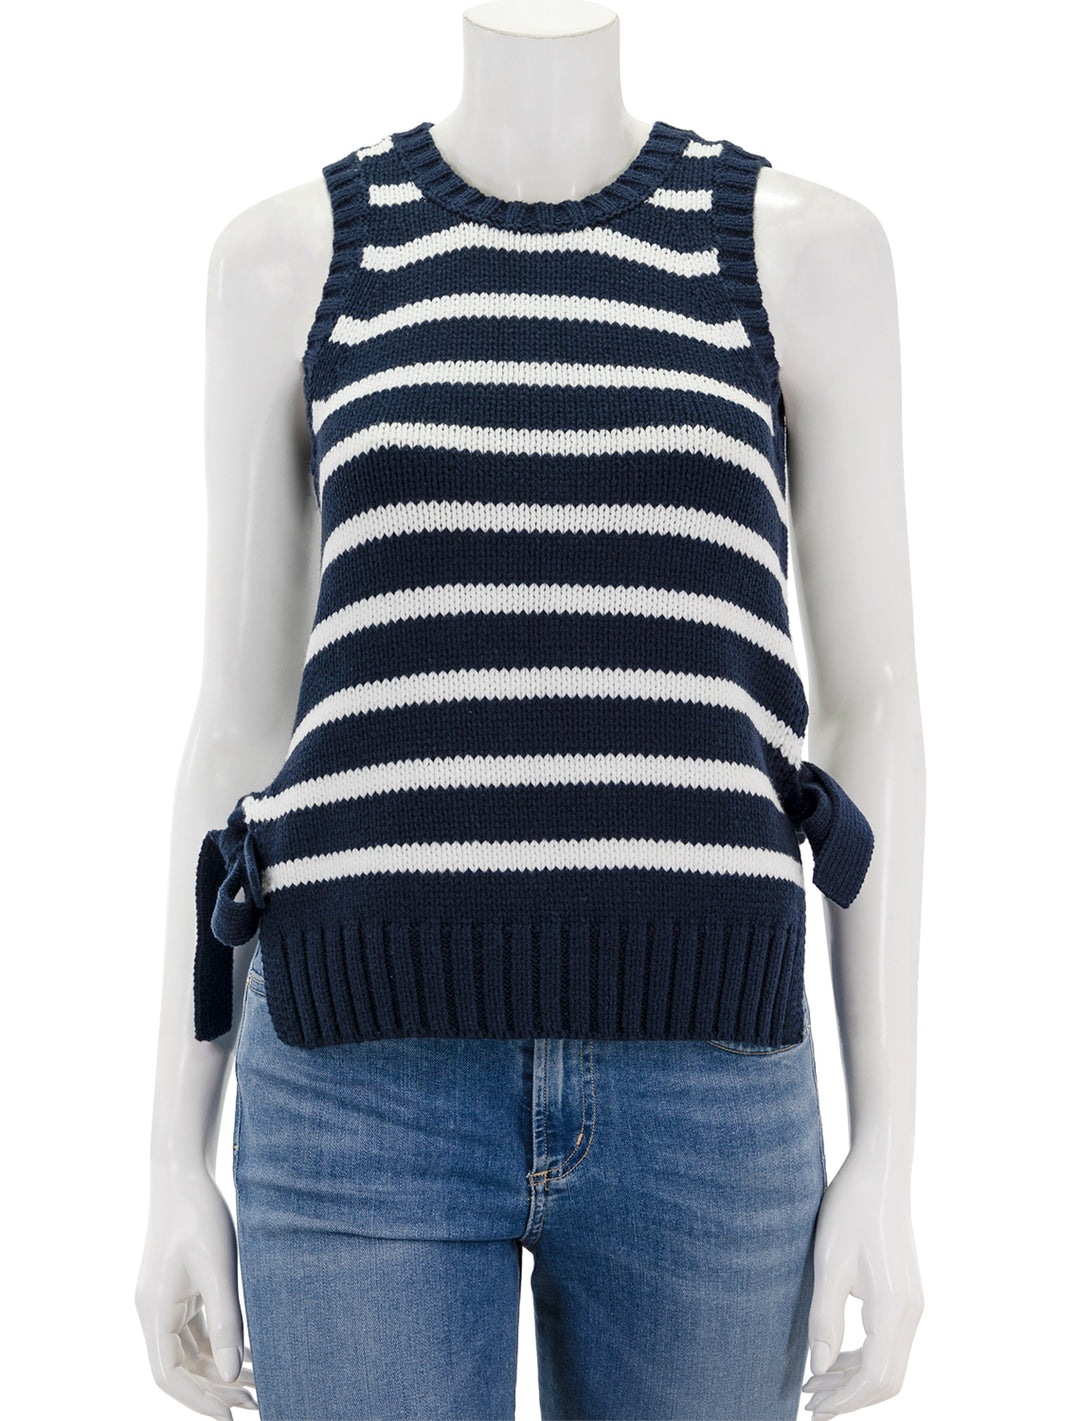 Front view of Splendid's zoey tie sweater tank in navy and white.